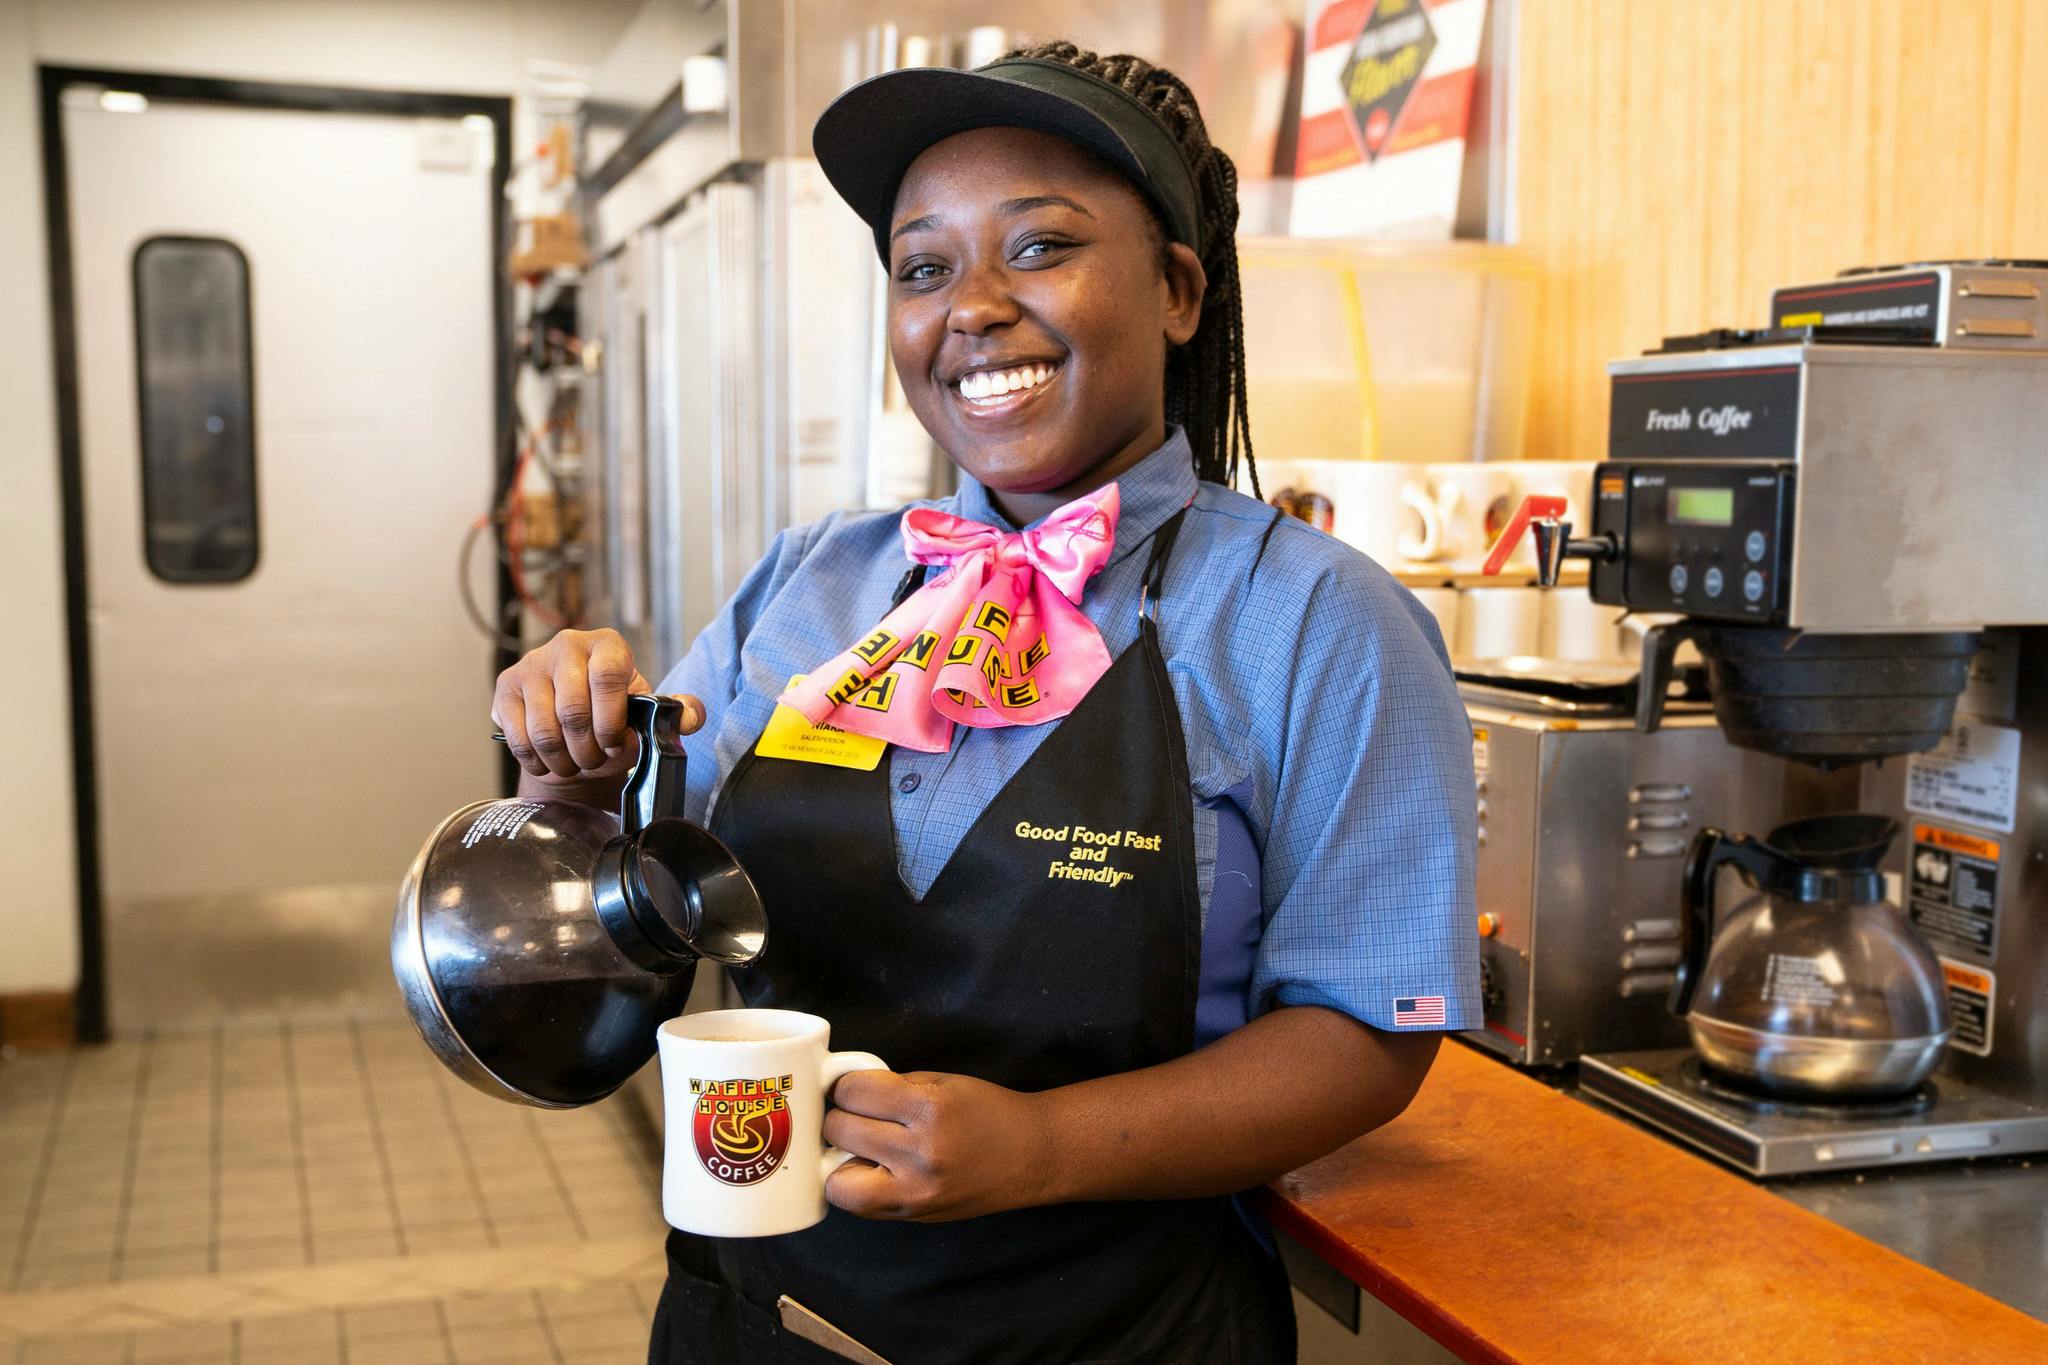 A Waffle House employee holding a coffee cup and coffee pot